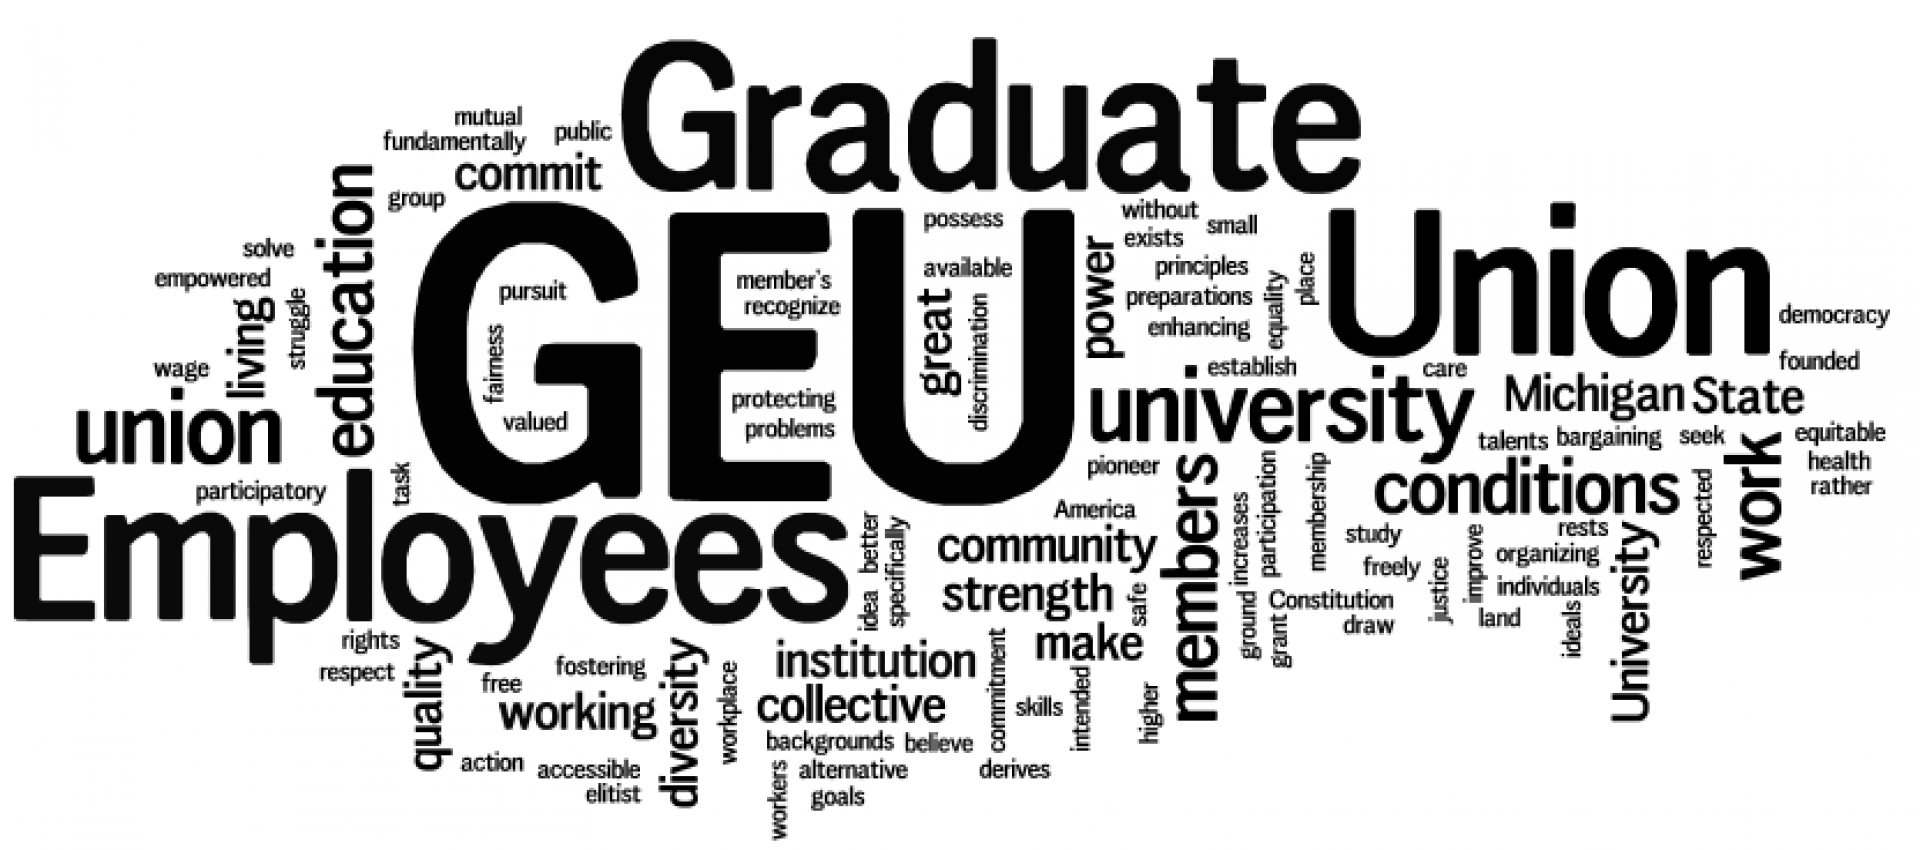 word cloud in order of importance (abridged): GEU, Graduate, Employees, Union, university, Michigan State, conditions work. members, power, commit, education, working, quality, diversity, equitable, health, democracy, great, living